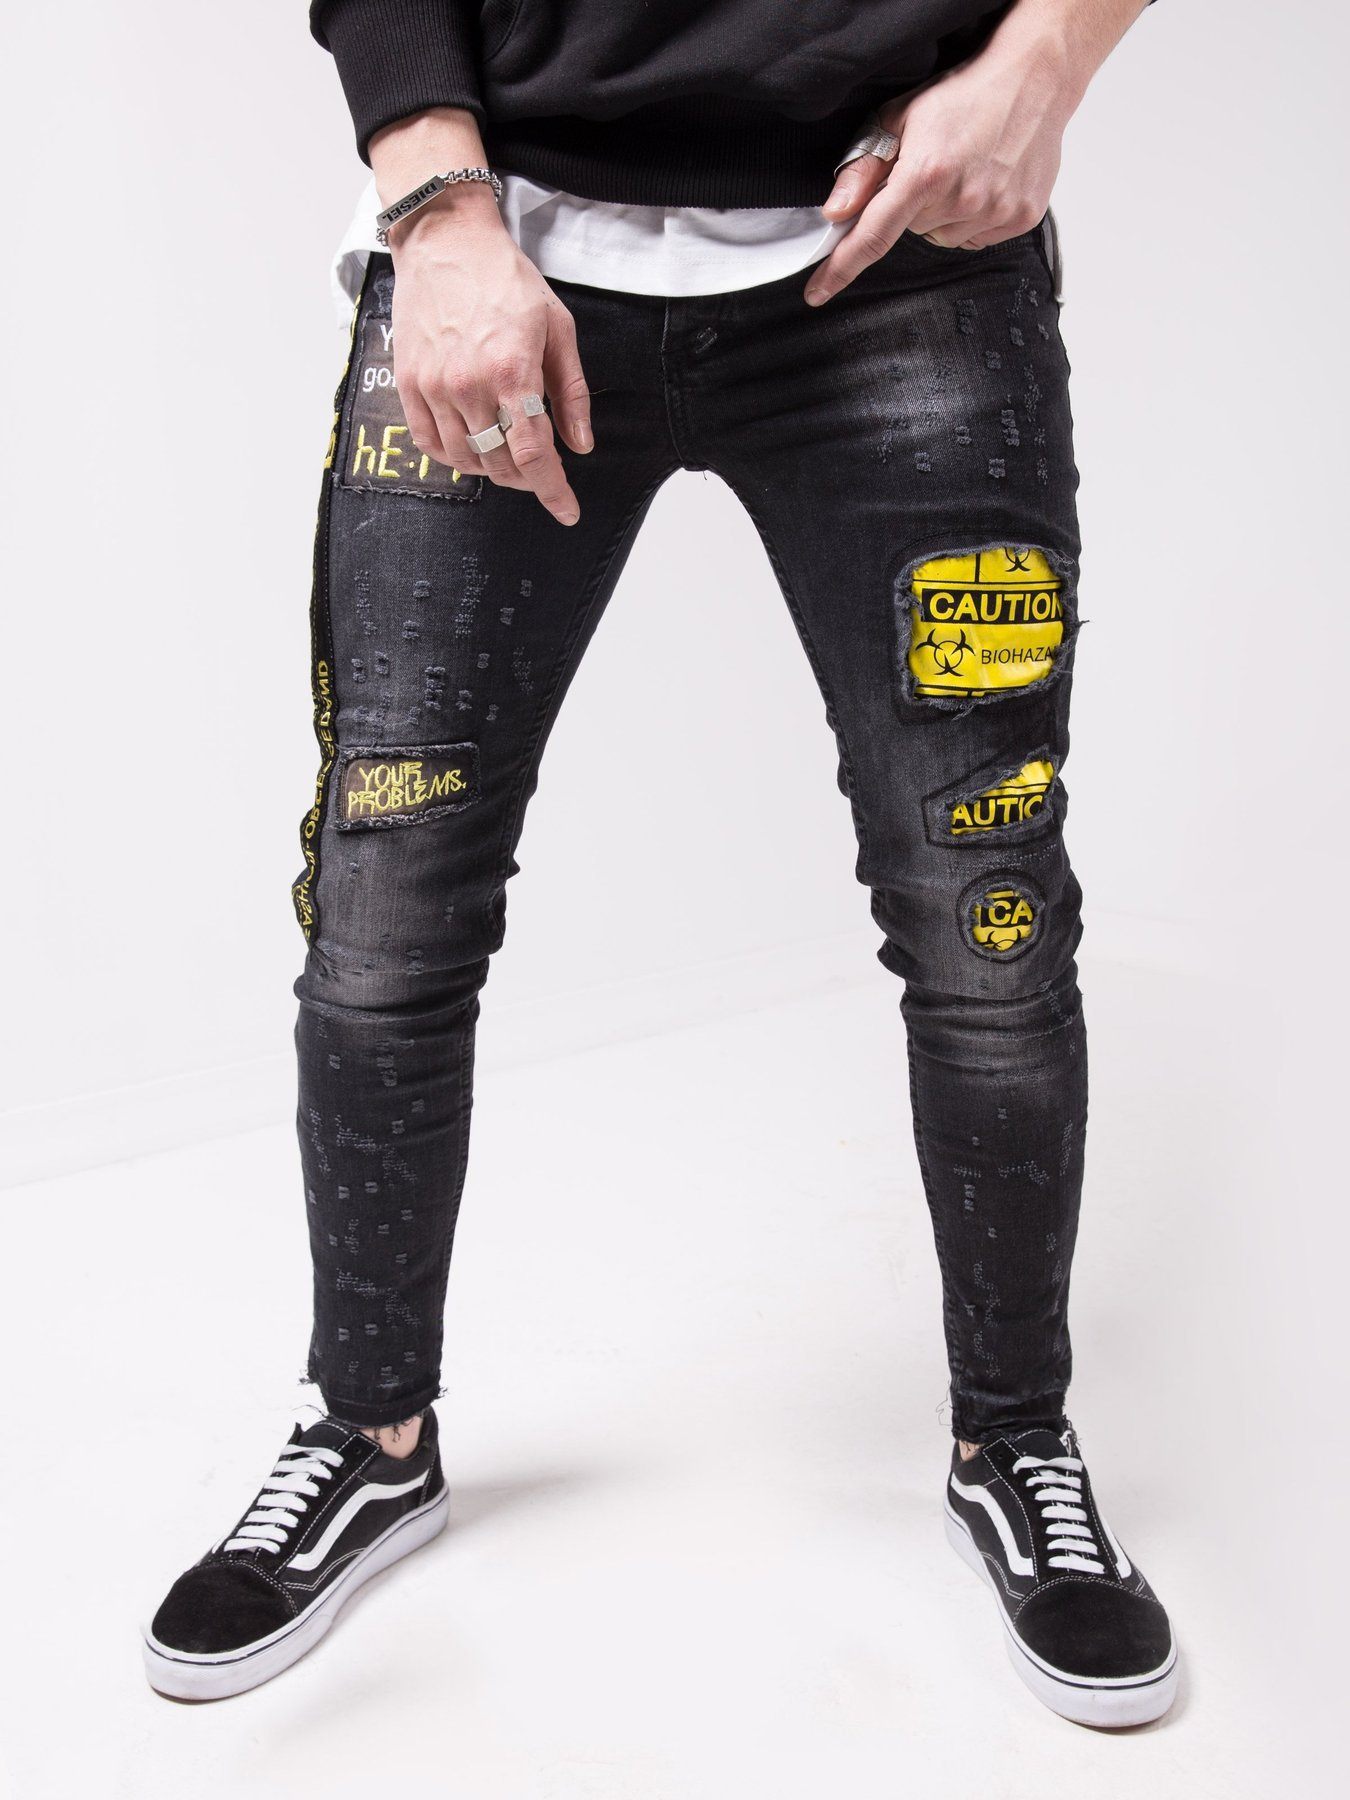 A man wearing a pair of BLACK FALCON jeans with yellow patches.